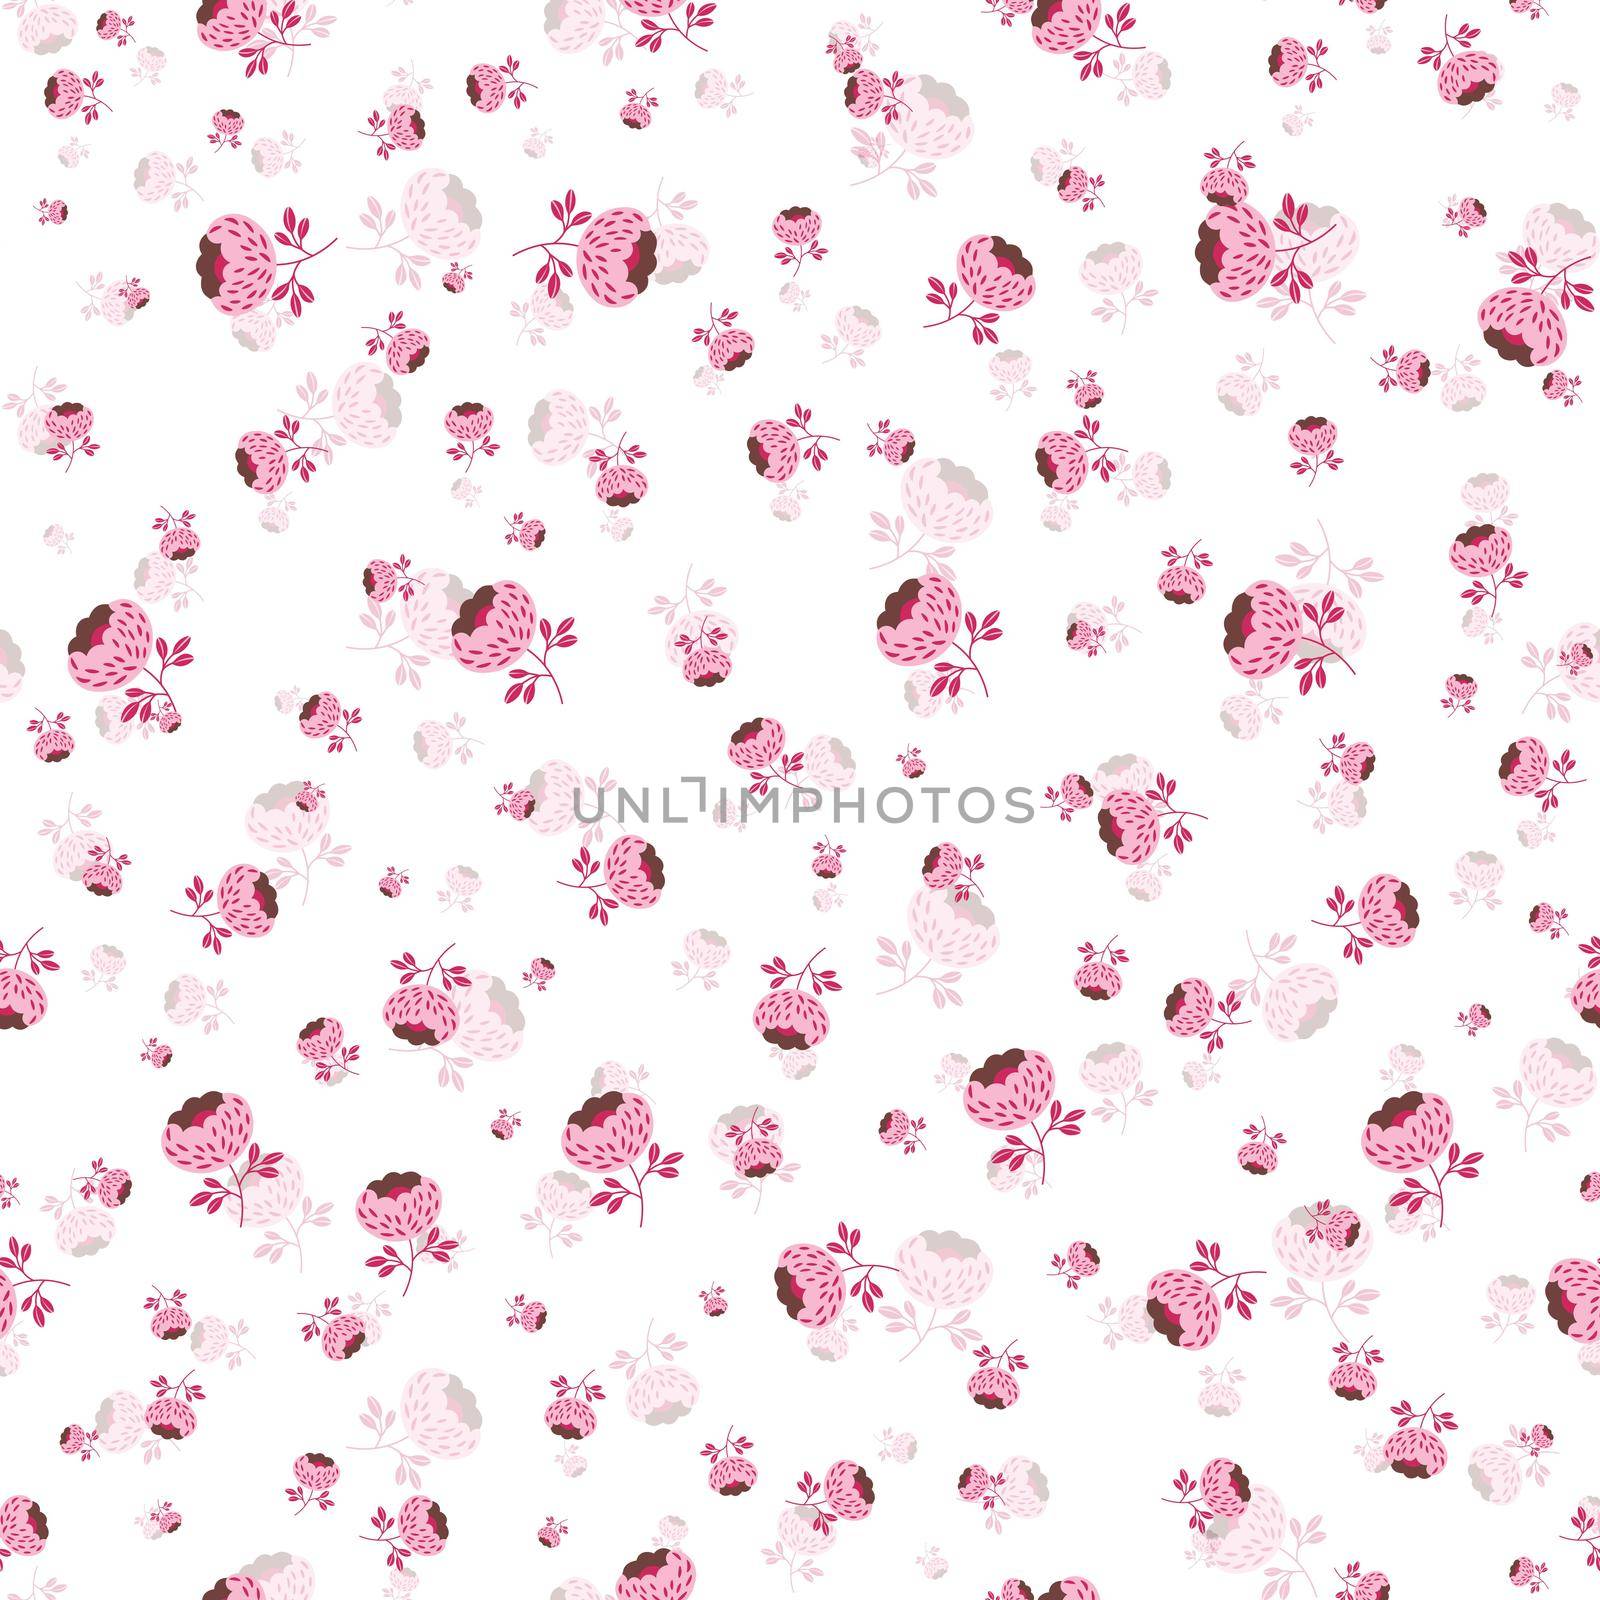 Seamless floral pattern based on traditional folk art ornaments. Pink and white flowers on light background. Scandinavian style. Sweden nordic style. Vector illustration. Simple minimalistic pattern